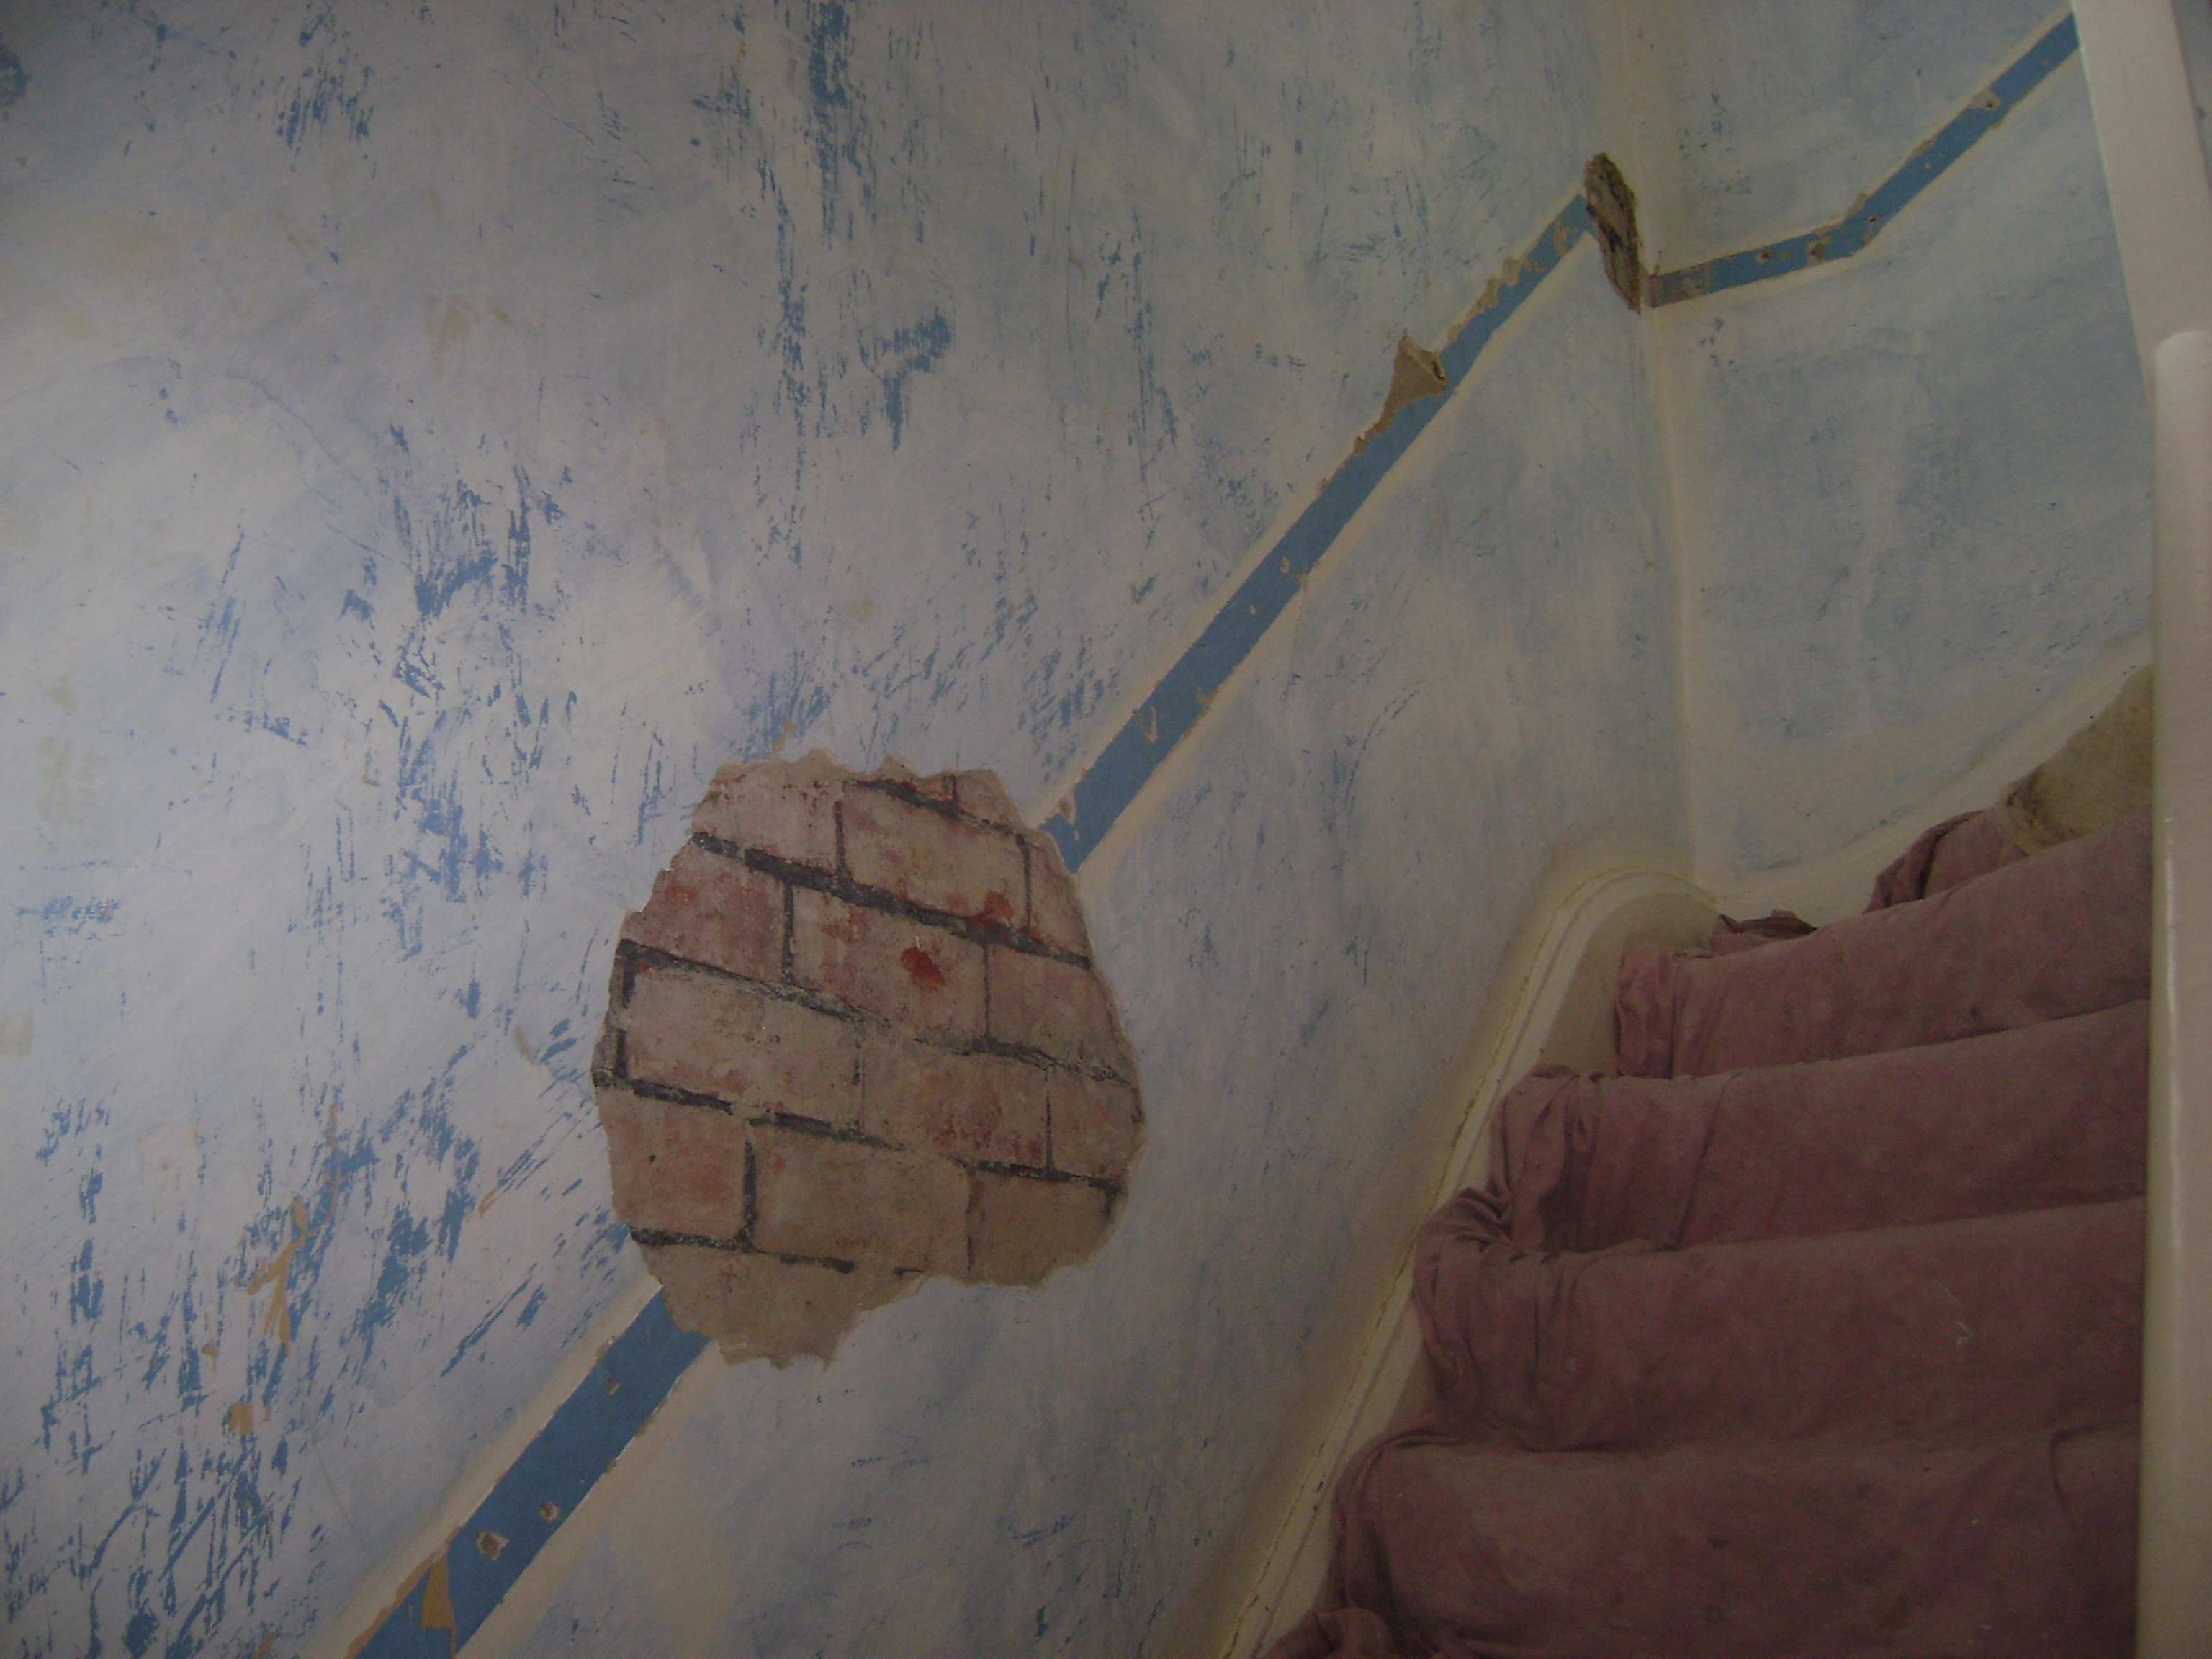 After the customer removed dado rail from this stairwell, a few sections of the wall were blown